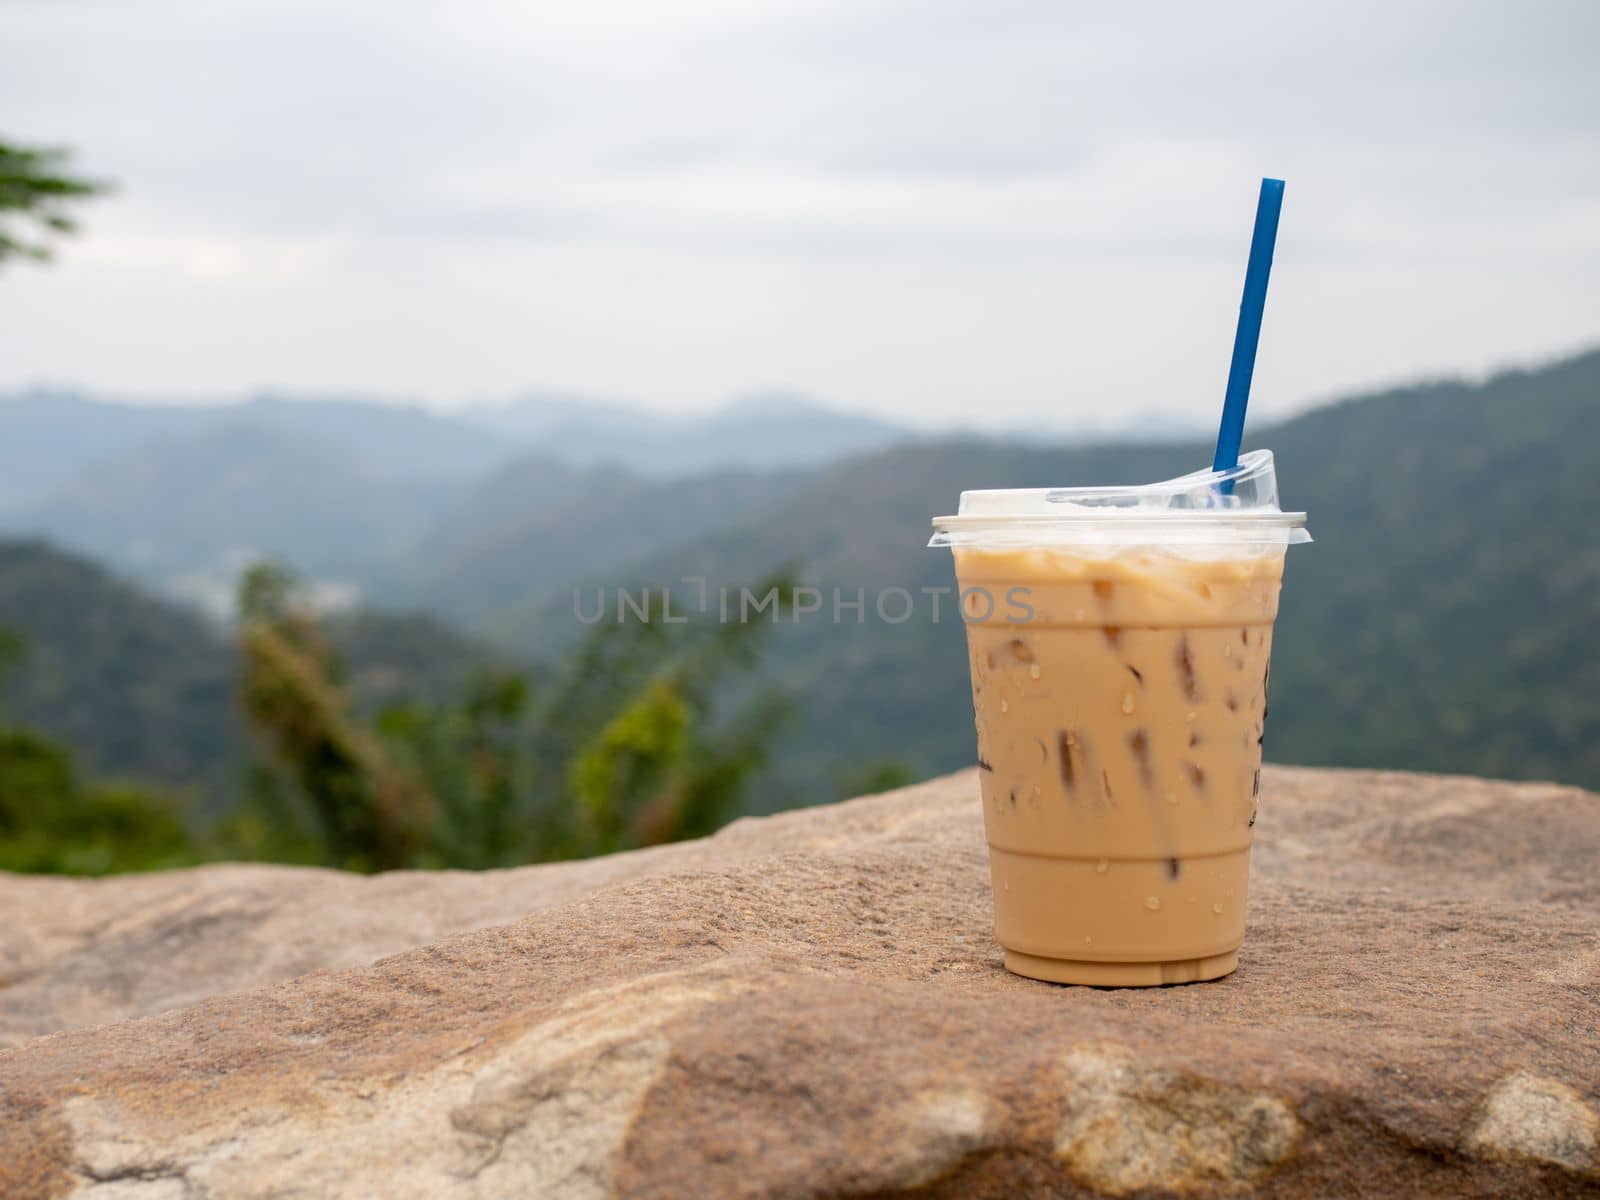 A glass of iced coffee is placed on a rock against a background of mountains and sky.